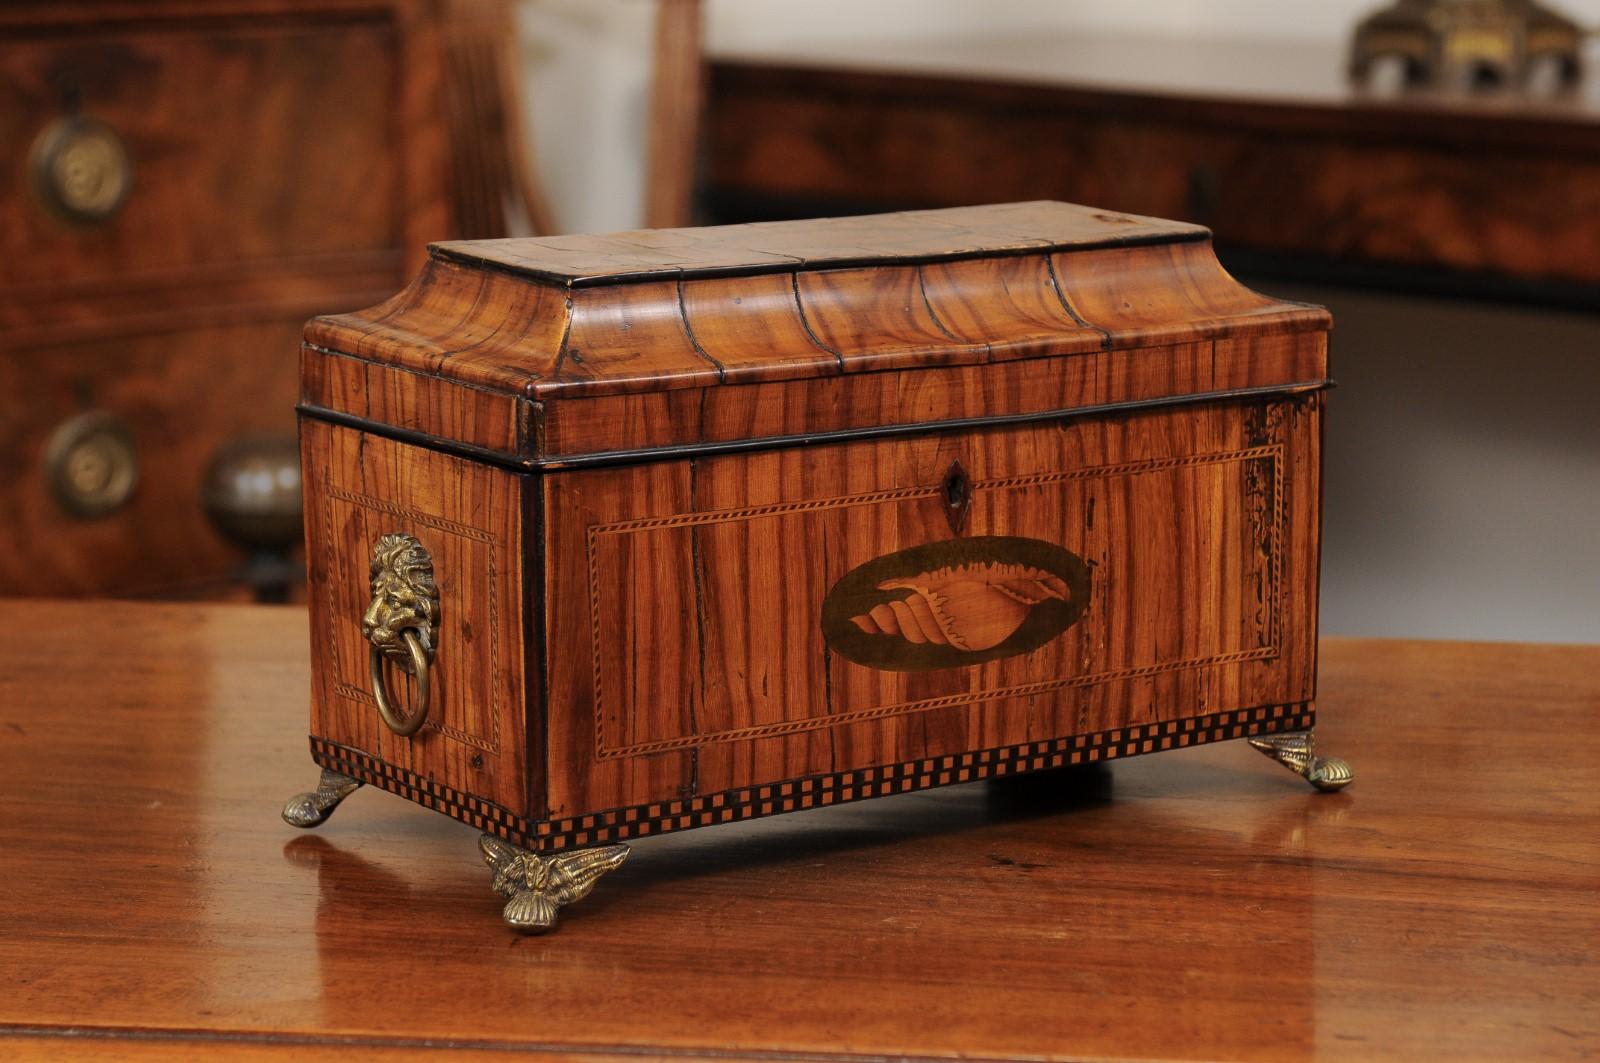 An early 19th century George III olive wood letter box featuring shell and parquetry inlay, lion head pulls on sides ending in brass feet.